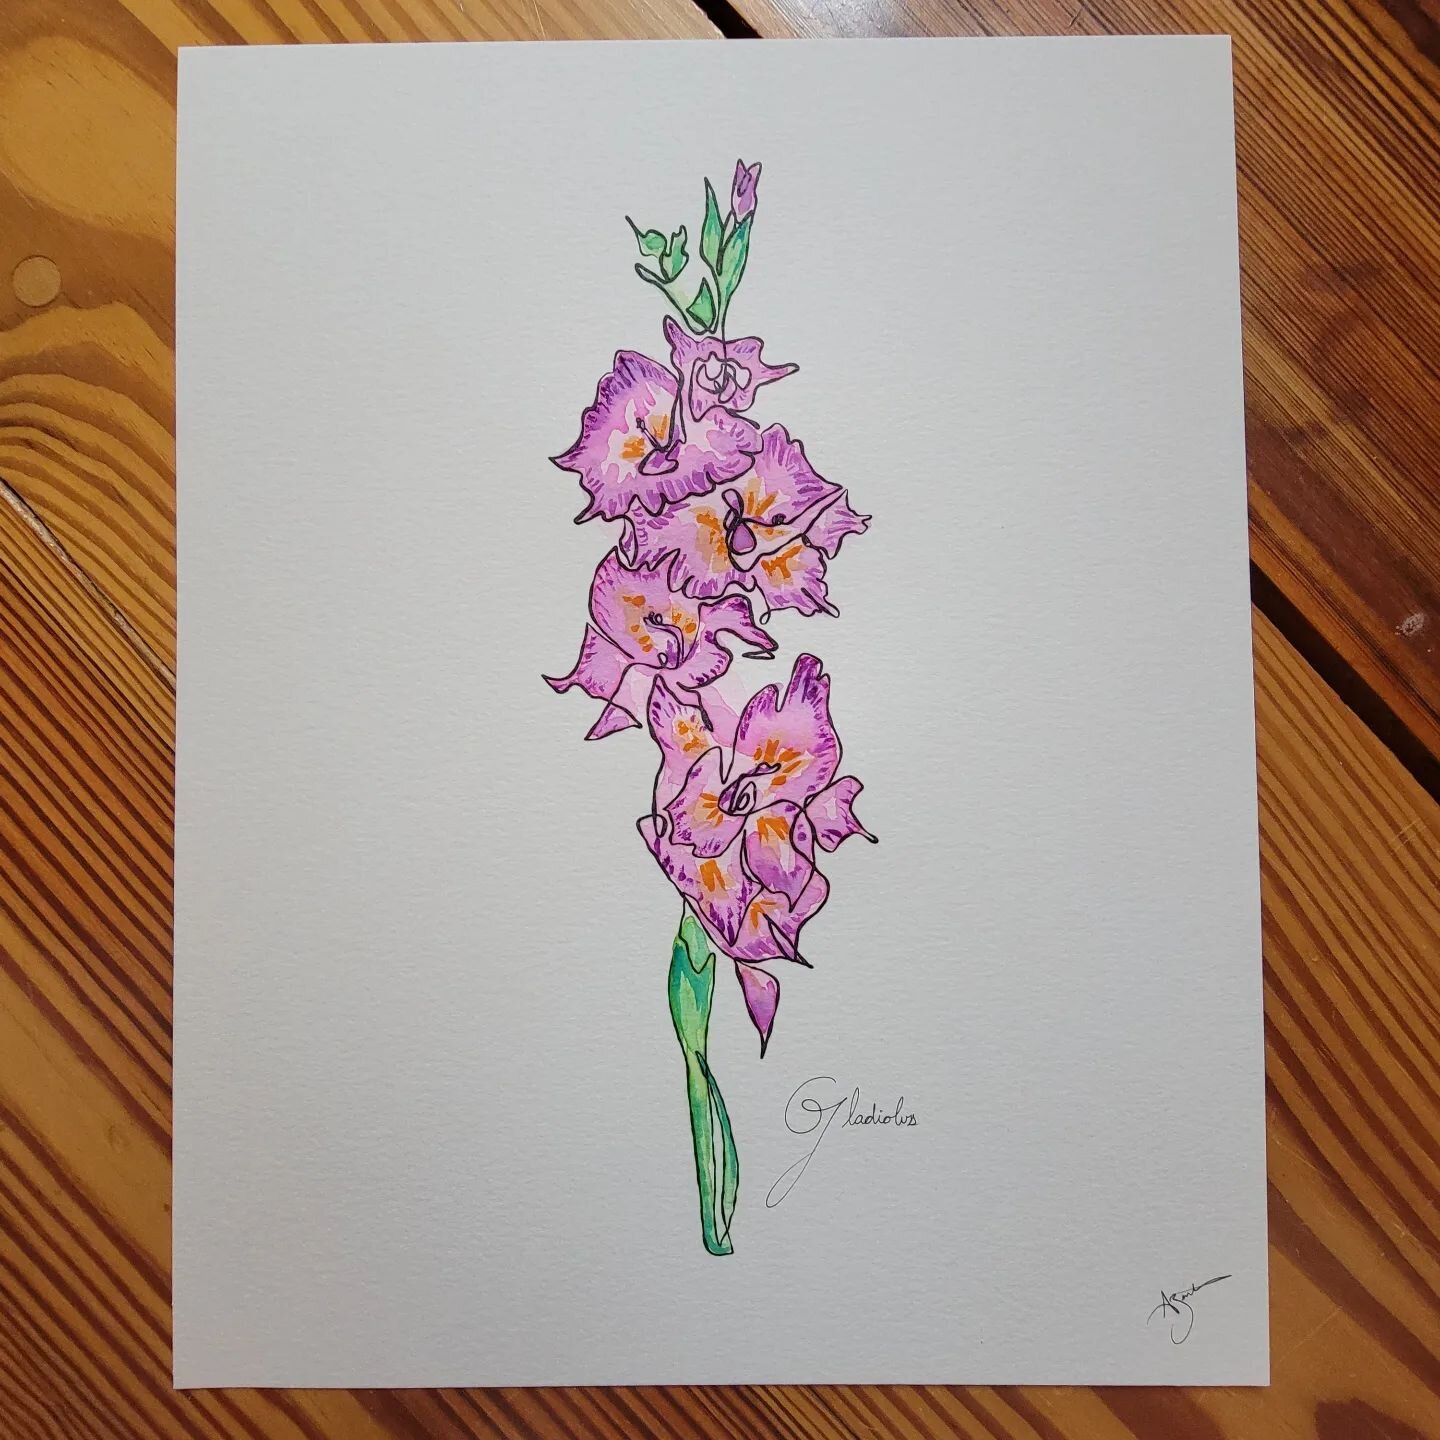 Gladiolus, the August birth flower the symbol of&nbsp;remembrance, calm, integrity, and infatuation

This is a printed copy of my single line drawing which I watercolored 

#torontoartist #torontoart #lineart #linedrawing #singleline #singlelineart #